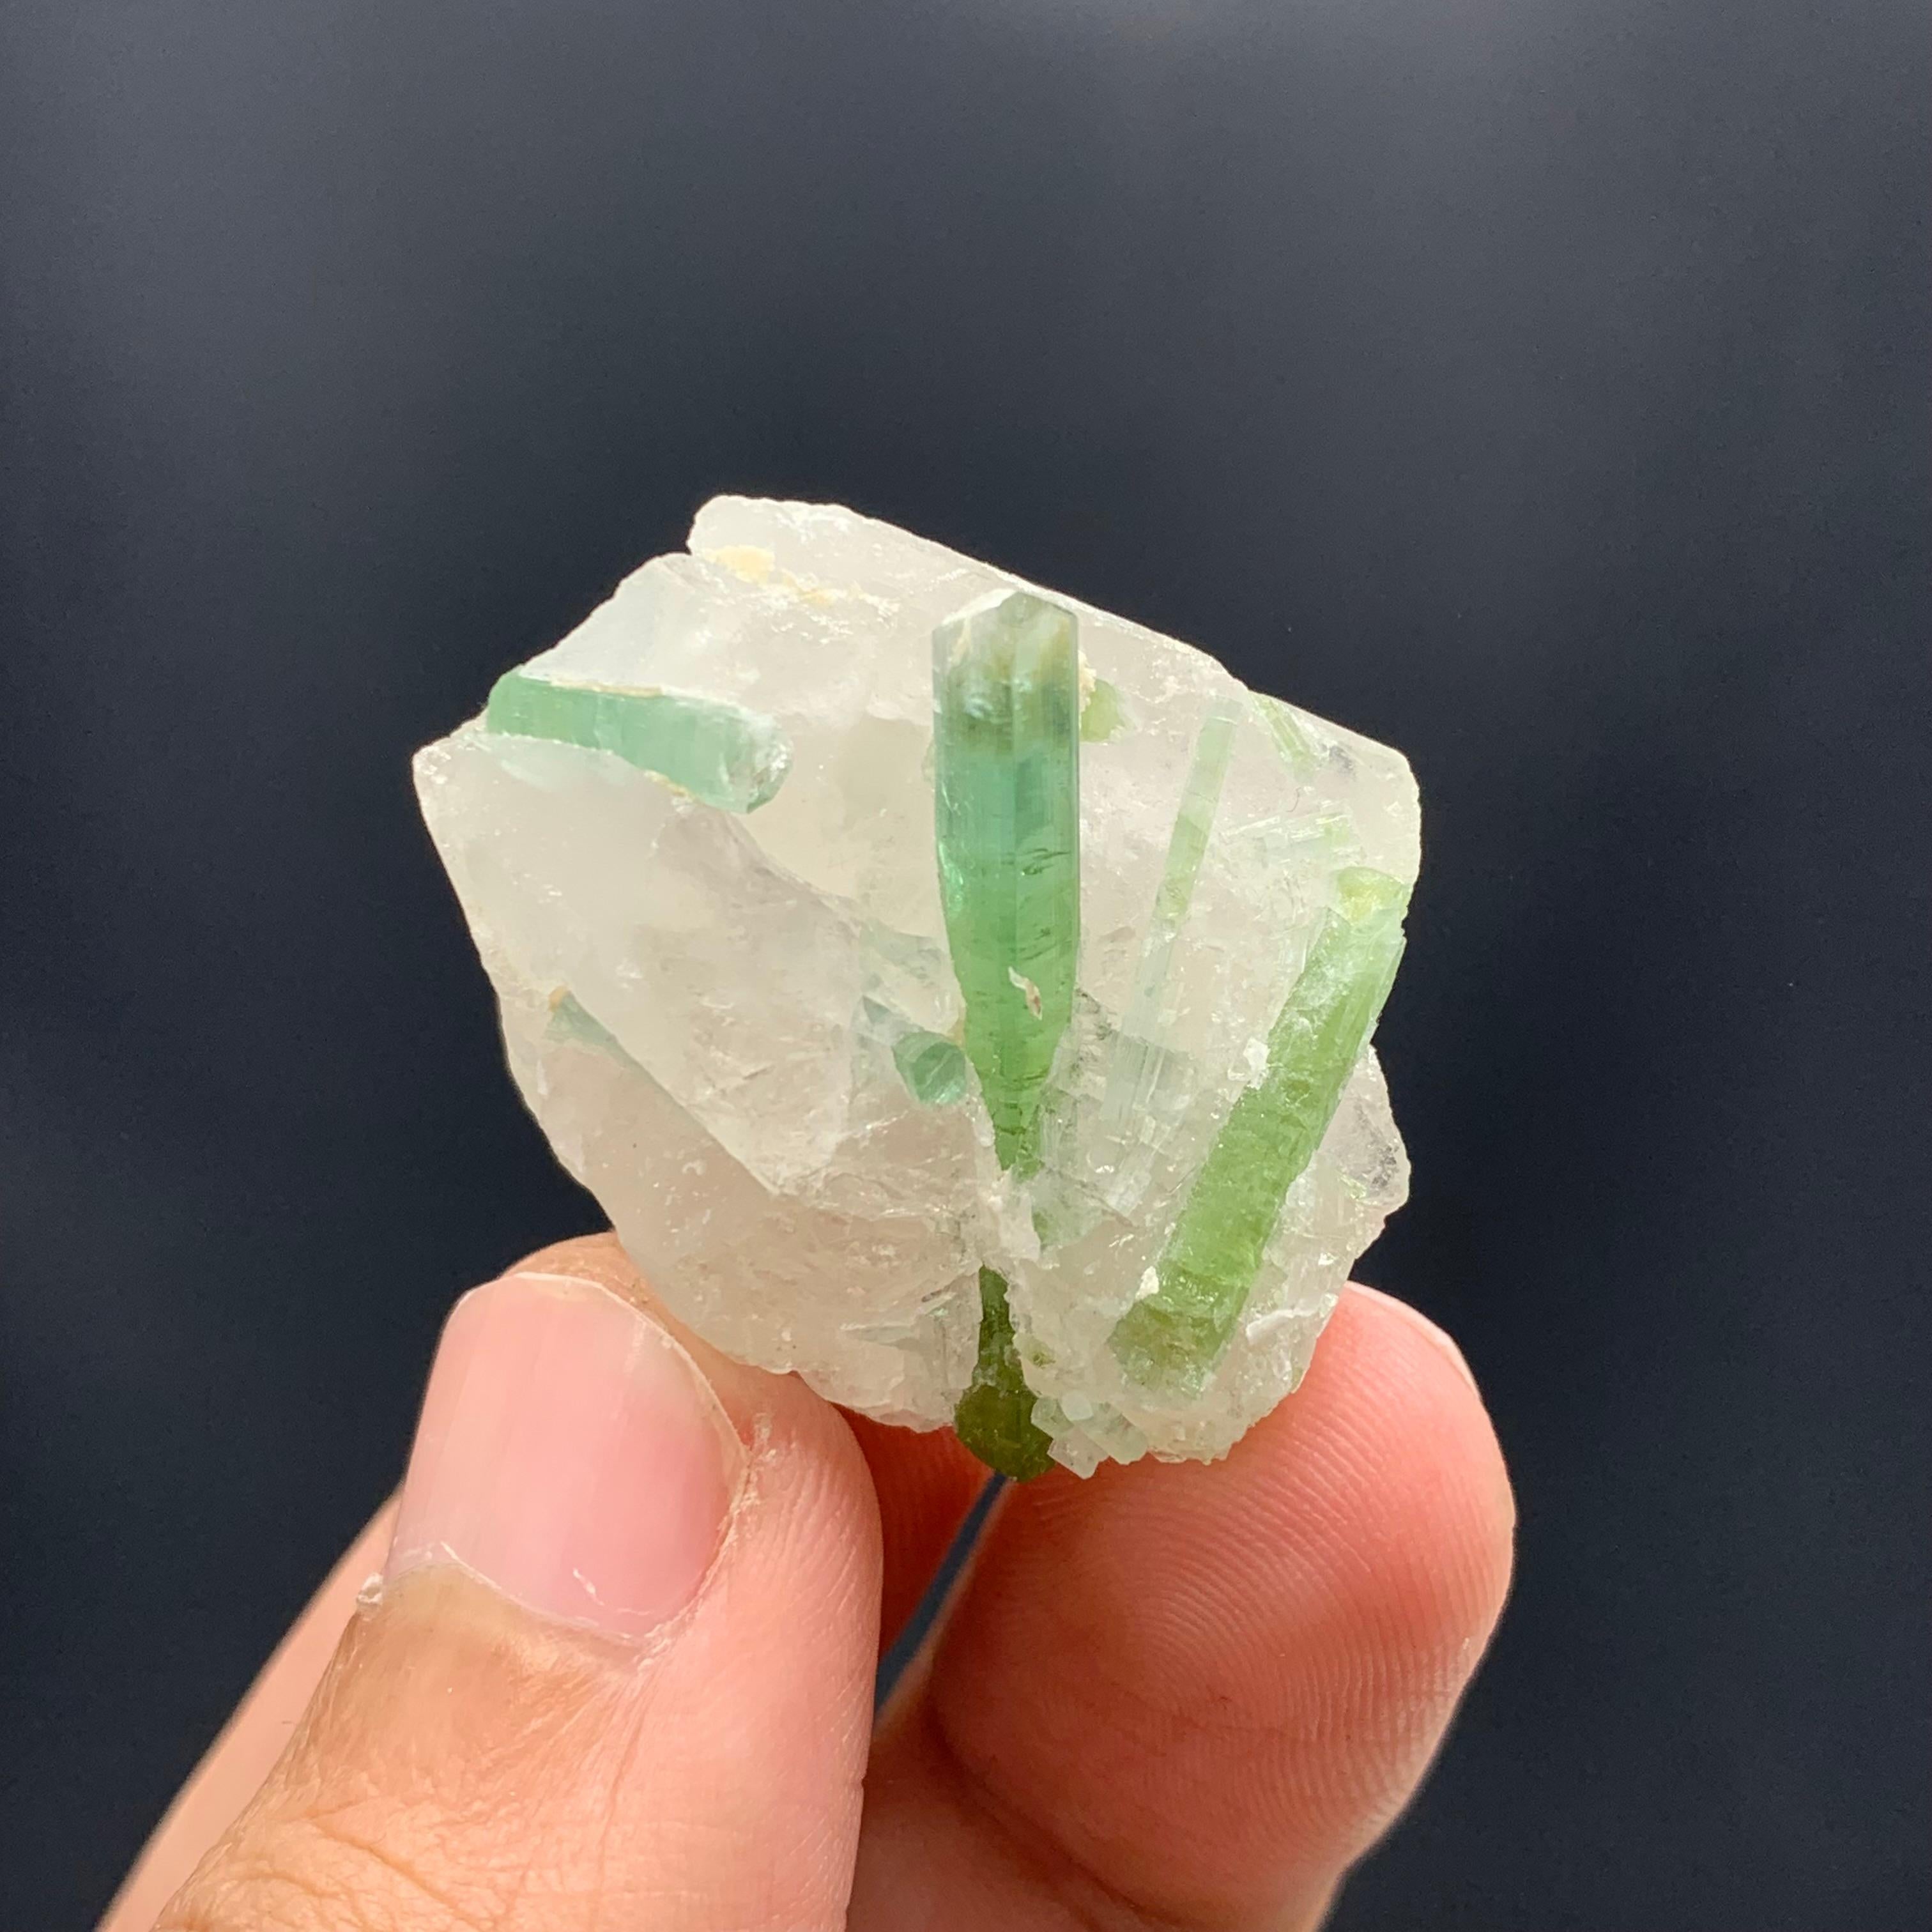 Other 18.49 Gram Beautiful Tourmaline Crystals Attached With Quartz From Afghanistan  For Sale